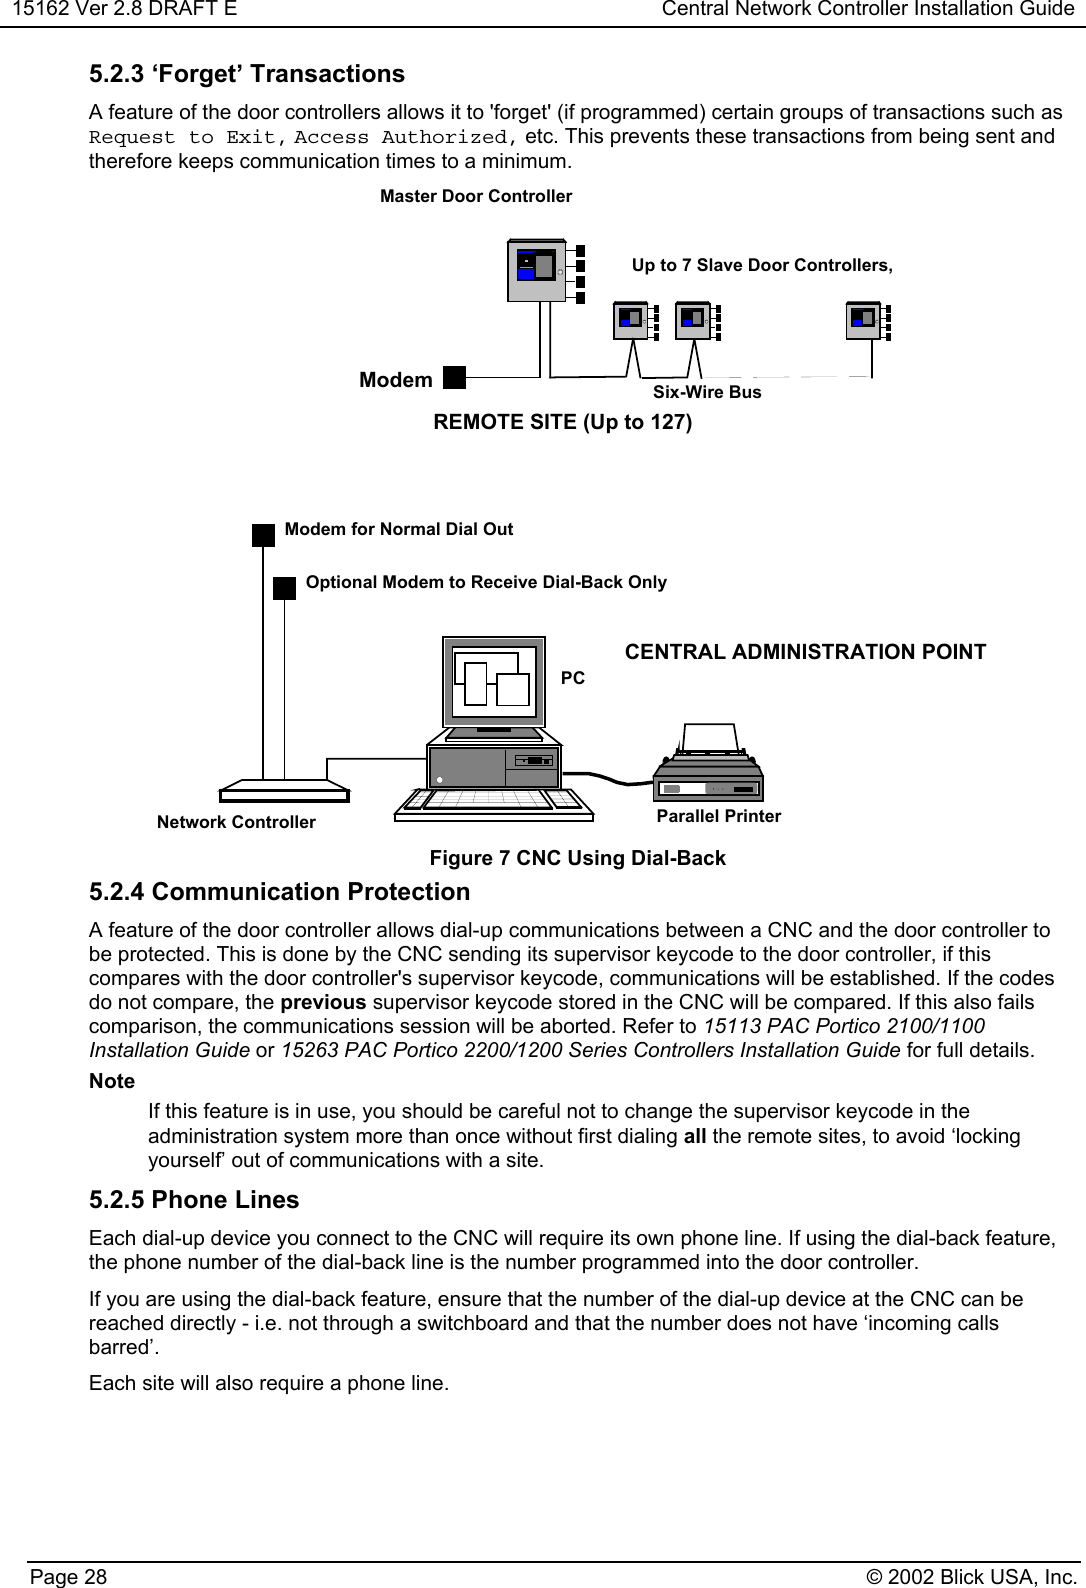 15162 Ver 2.8 DRAFT E Central Network Controller Installation GuidePage 28 © 2002 Blick USA, Inc.5.2.3 ‘Forget’ TransactionsA feature of the door controllers allows it to &apos;forget&apos; (if programmed) certain groups of transactions such asRequest to Exit, Access Authorized, etc. This prevents these transactions from being sent andtherefore keeps communication times to a minimum.Network Controller Parallel PrinterPCUp to 7 Slave Door Controllers,Six-Wire BusMaster Door ControllerREMOTE SITE (Up to 127)CENTRAL ADMINISTRATION POINTModem for Normal Dial OutOptional Modem to Receive Dial-Back OnlyModemFigure 7 CNC Using Dial-Back5.2.4 Communication ProtectionA feature of the door controller allows dial-up communications between a CNC and the door controller tobe protected. This is done by the CNC sending its supervisor keycode to the door controller, if thiscompares with the door controller&apos;s supervisor keycode, communications will be established. If the codesdo not compare, the previous supervisor keycode stored in the CNC will be compared. If this also failscomparison, the communications session will be aborted. Refer to 15113 PAC Portico 2100/1100Installation Guide or 15263 PAC Portico 2200/1200 Series Controllers Installation Guide for full details.NoteIf this feature is in use, you should be careful not to change the supervisor keycode in theadministration system more than once without first dialing all the remote sites, to avoid ‘lockingyourself’ out of communications with a site.5.2.5 Phone LinesEach dial-up device you connect to the CNC will require its own phone line. If using the dial-back feature,the phone number of the dial-back line is the number programmed into the door controller.If you are using the dial-back feature, ensure that the number of the dial-up device at the CNC can bereached directly - i.e. not through a switchboard and that the number does not have ‘incoming callsbarred’.Each site will also require a phone line.